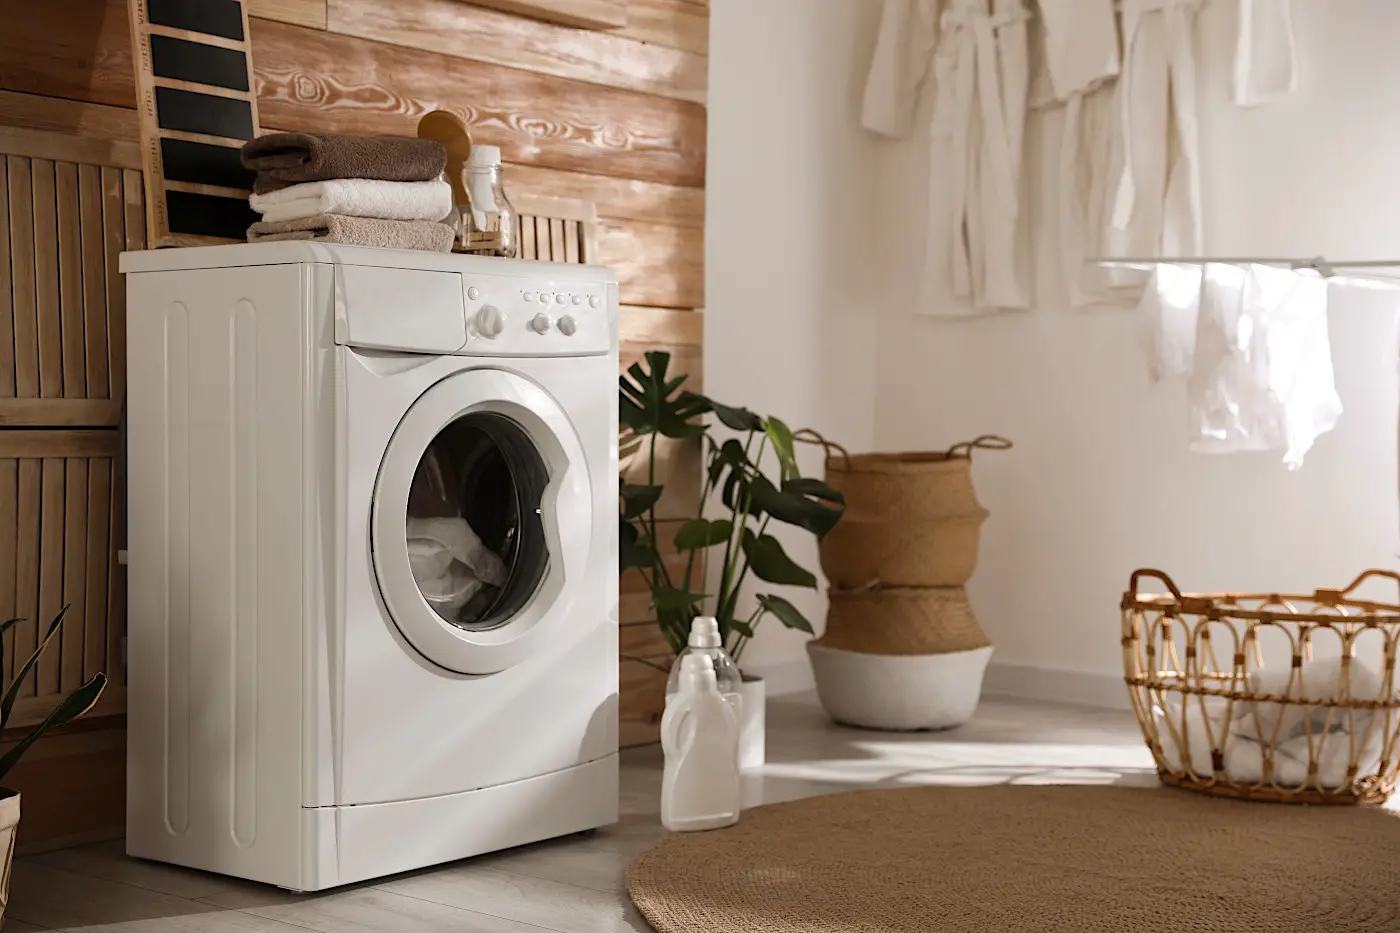 Create a Home Assistant Automation to Notify When the Laundry is Finished